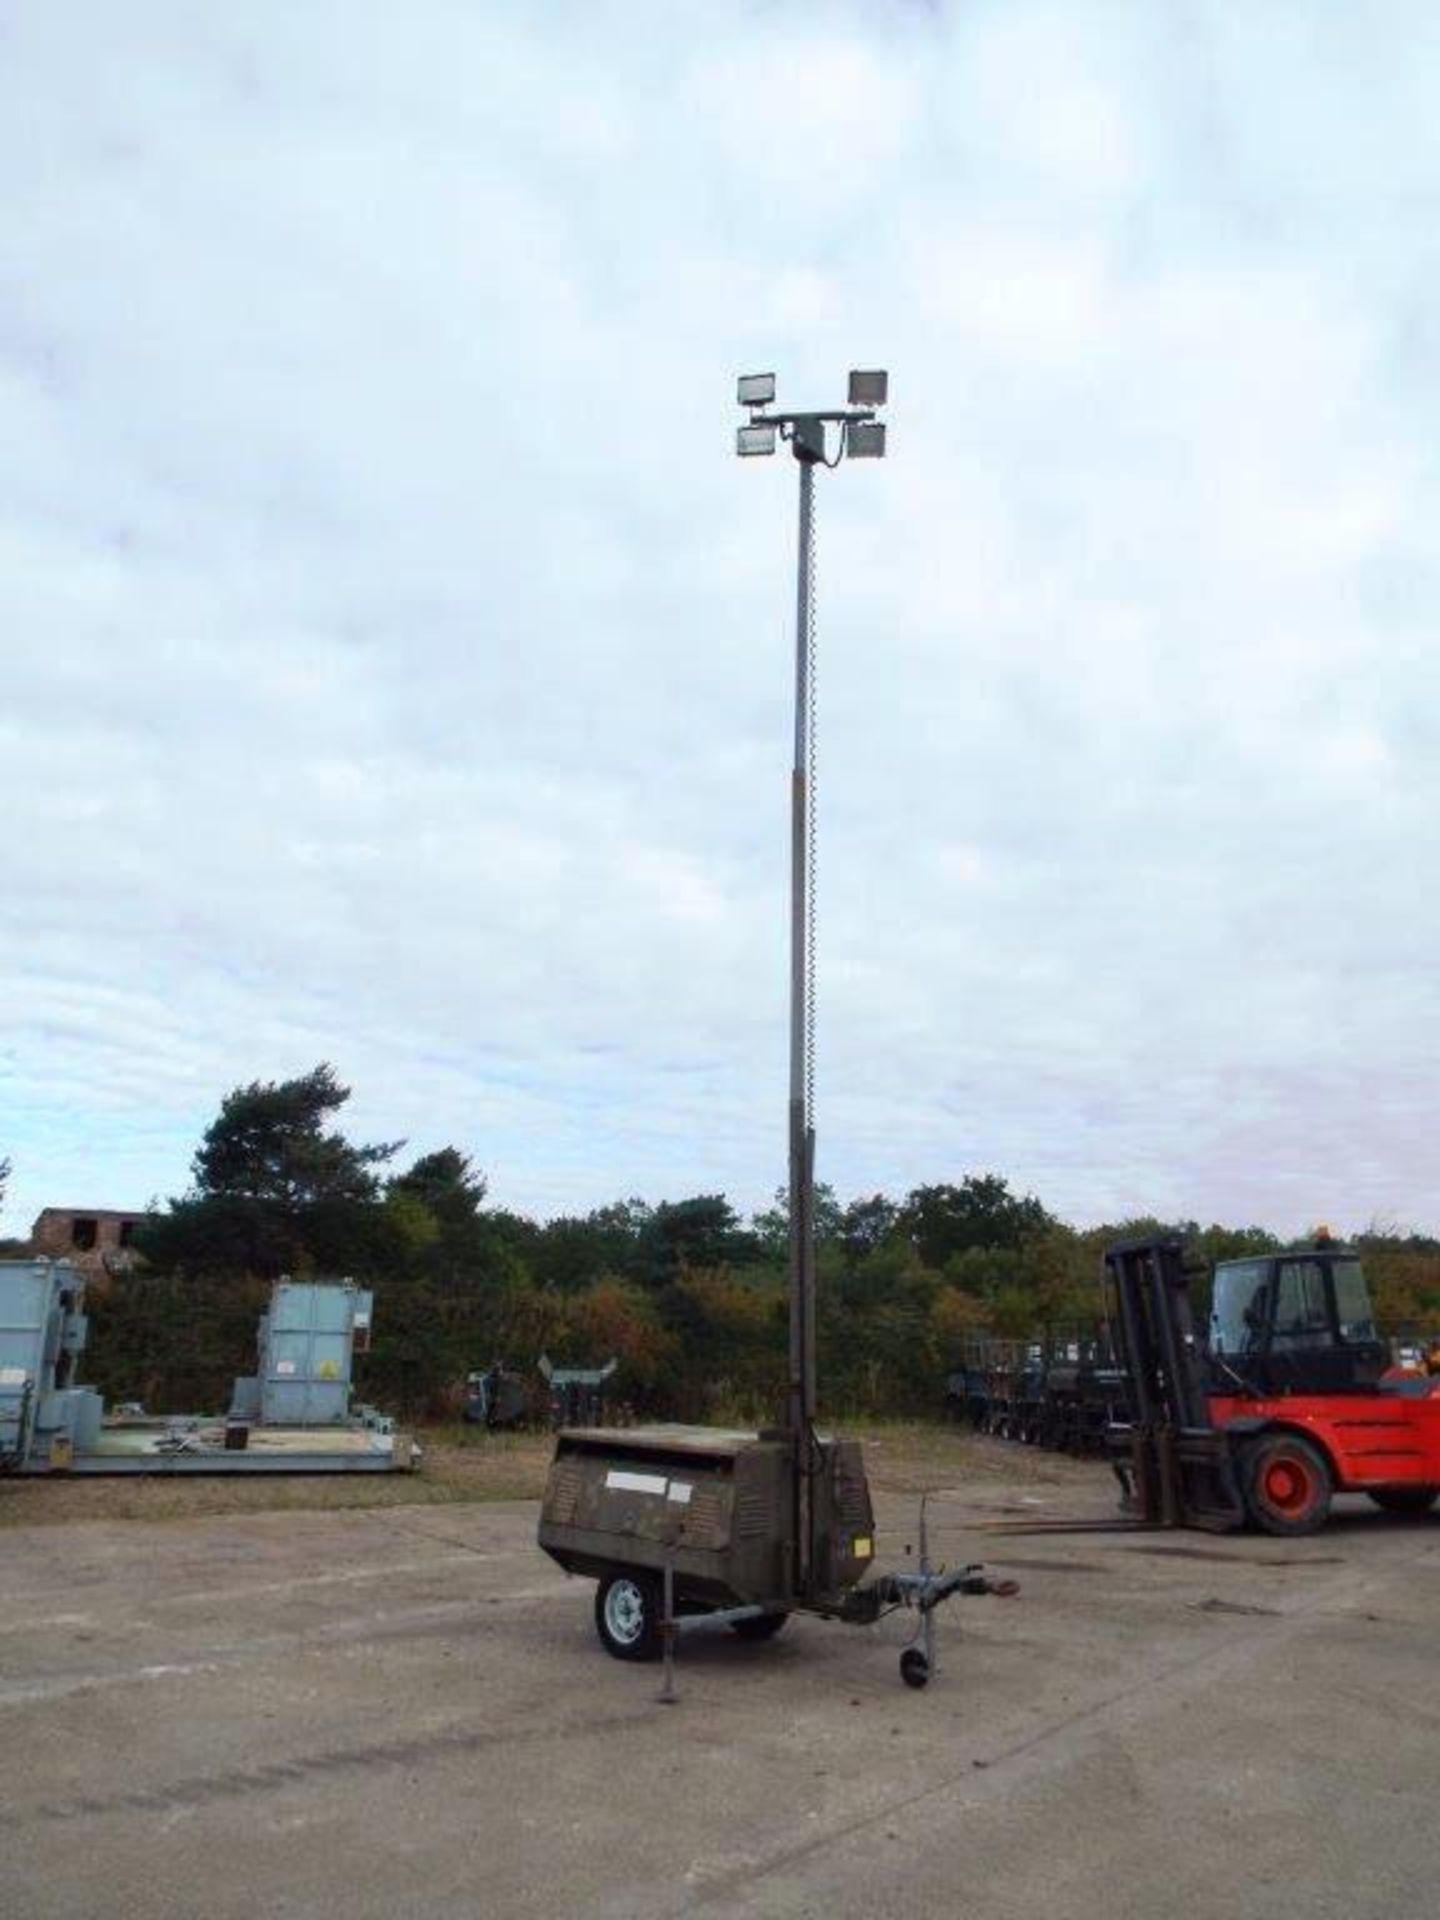 HyLite Lister Petter powered Trailer Mounted Lighting Tower